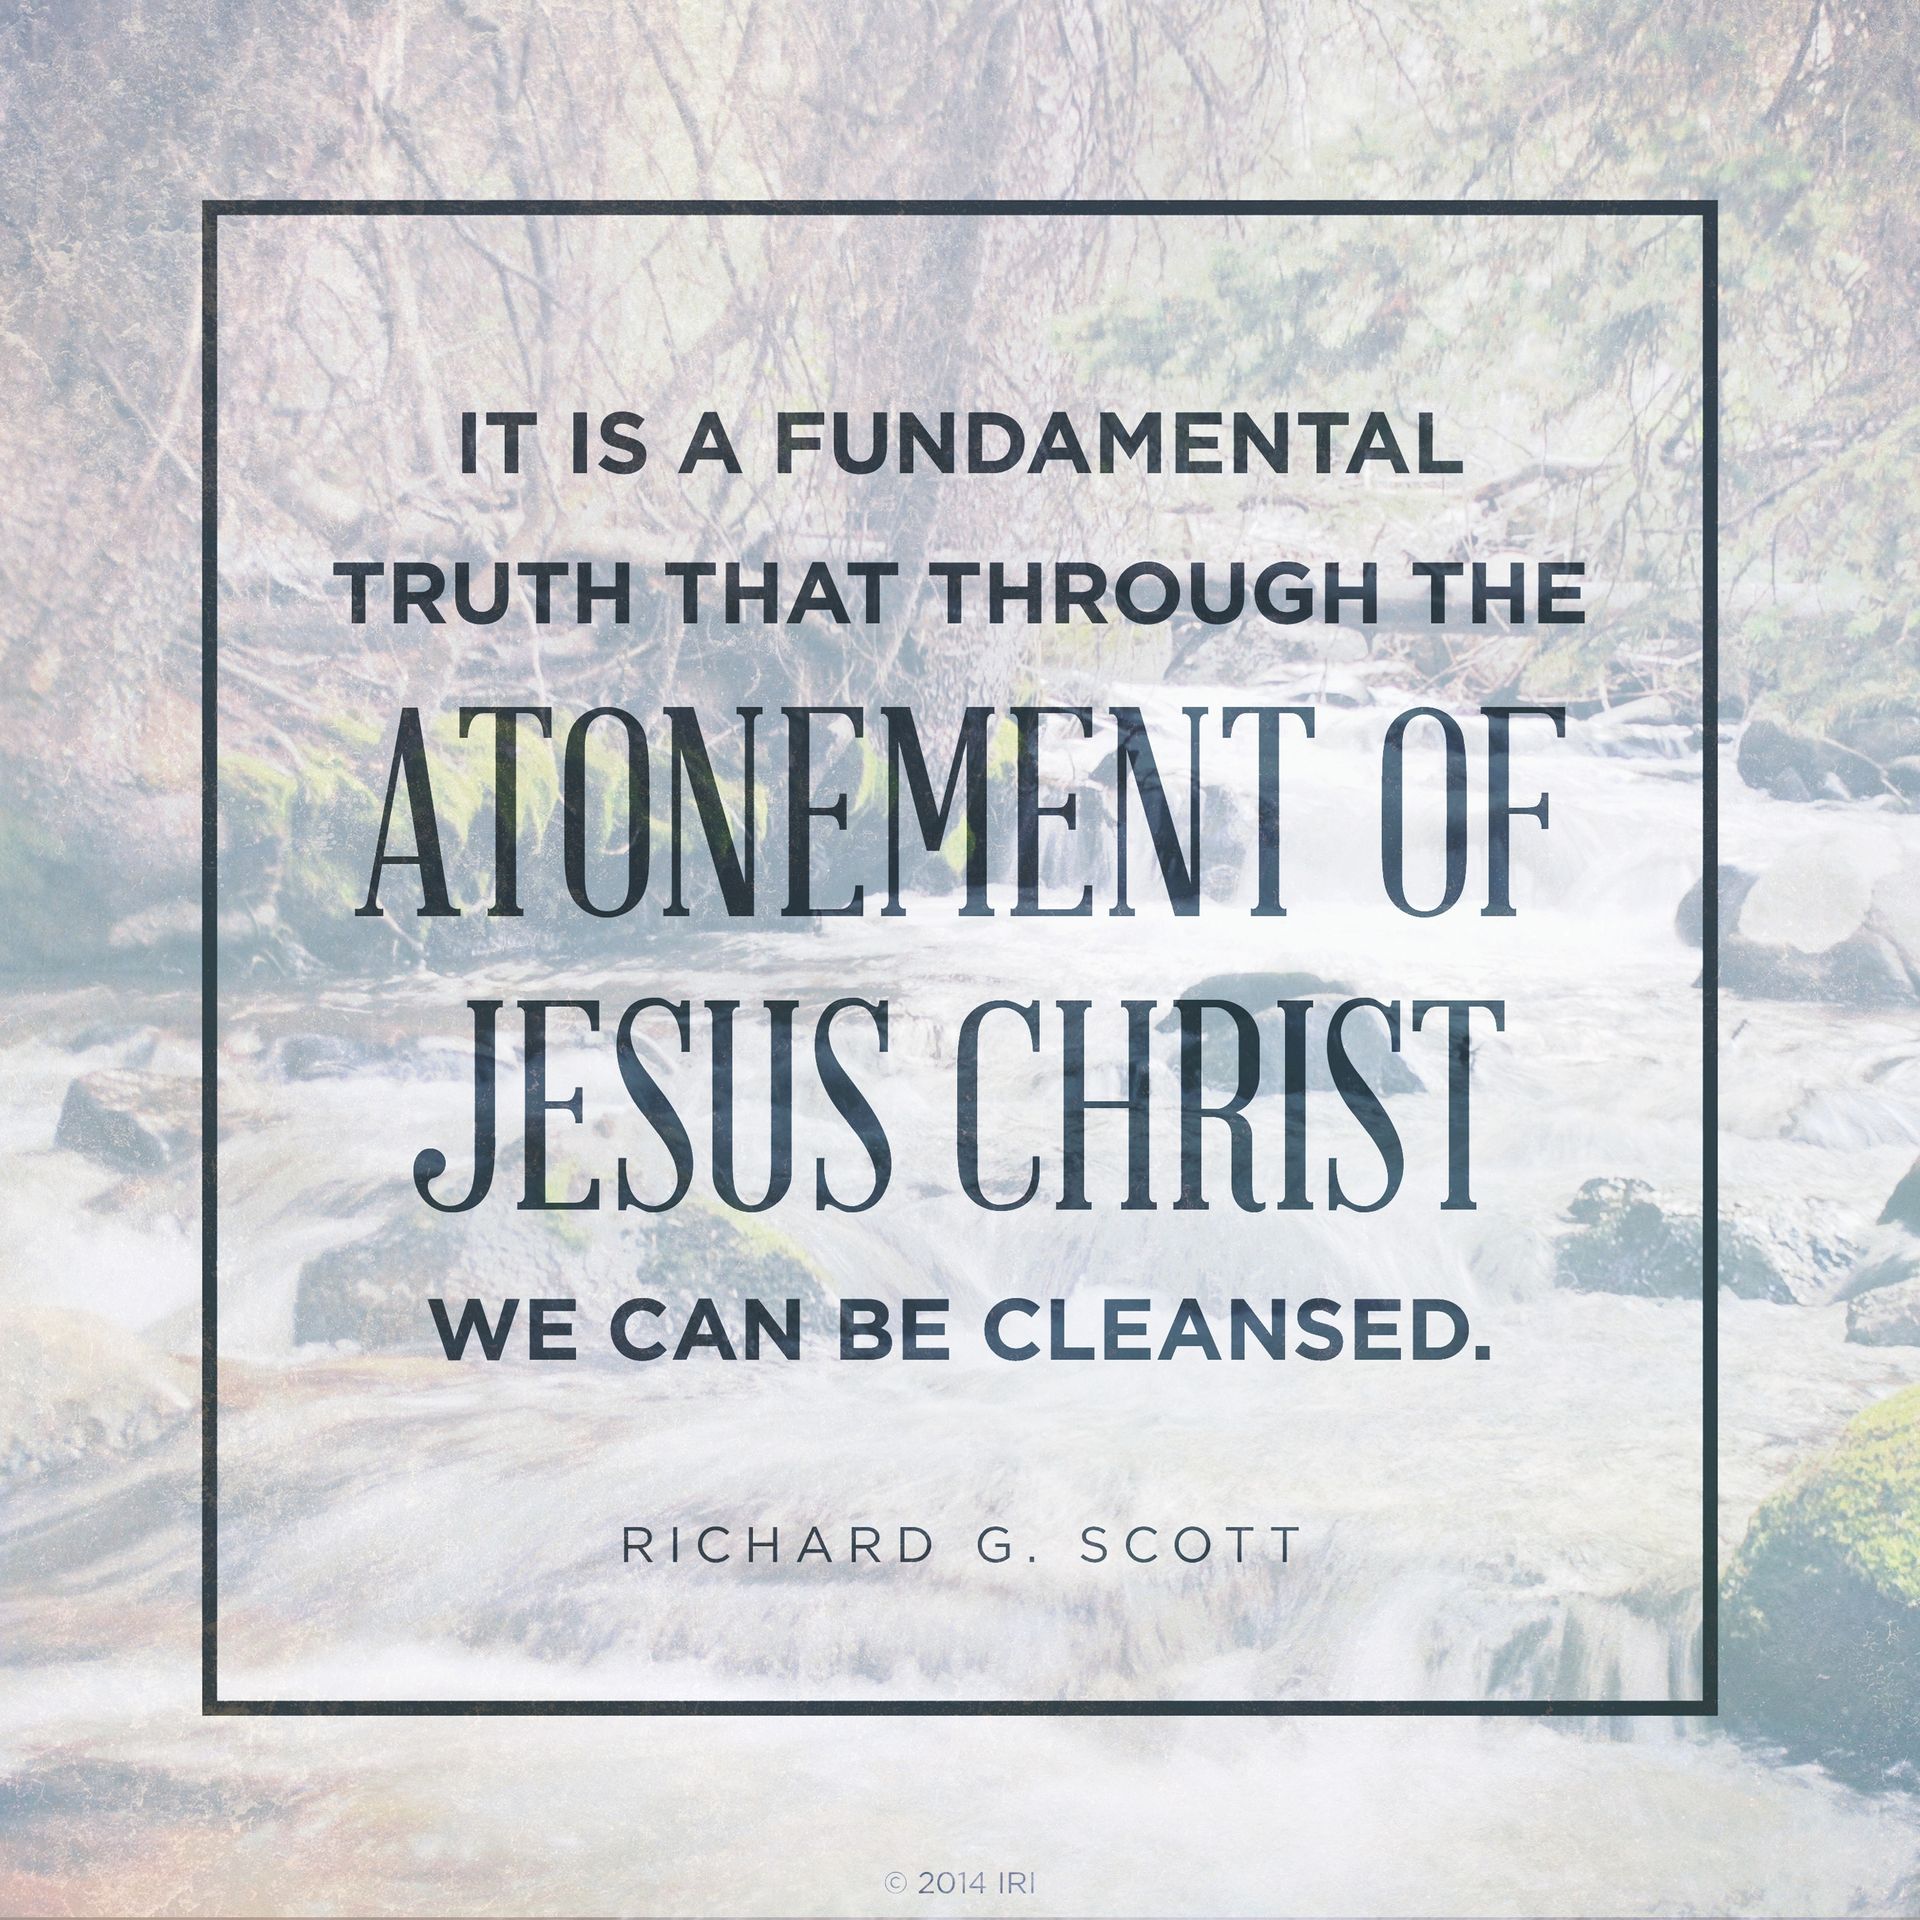 “It is a fundamental truth that through the Atonement of Jesus Christ we can be cleansed.”—Elder Richard G. Scott, “Personal Strength through the Atonement of Jesus Christ”